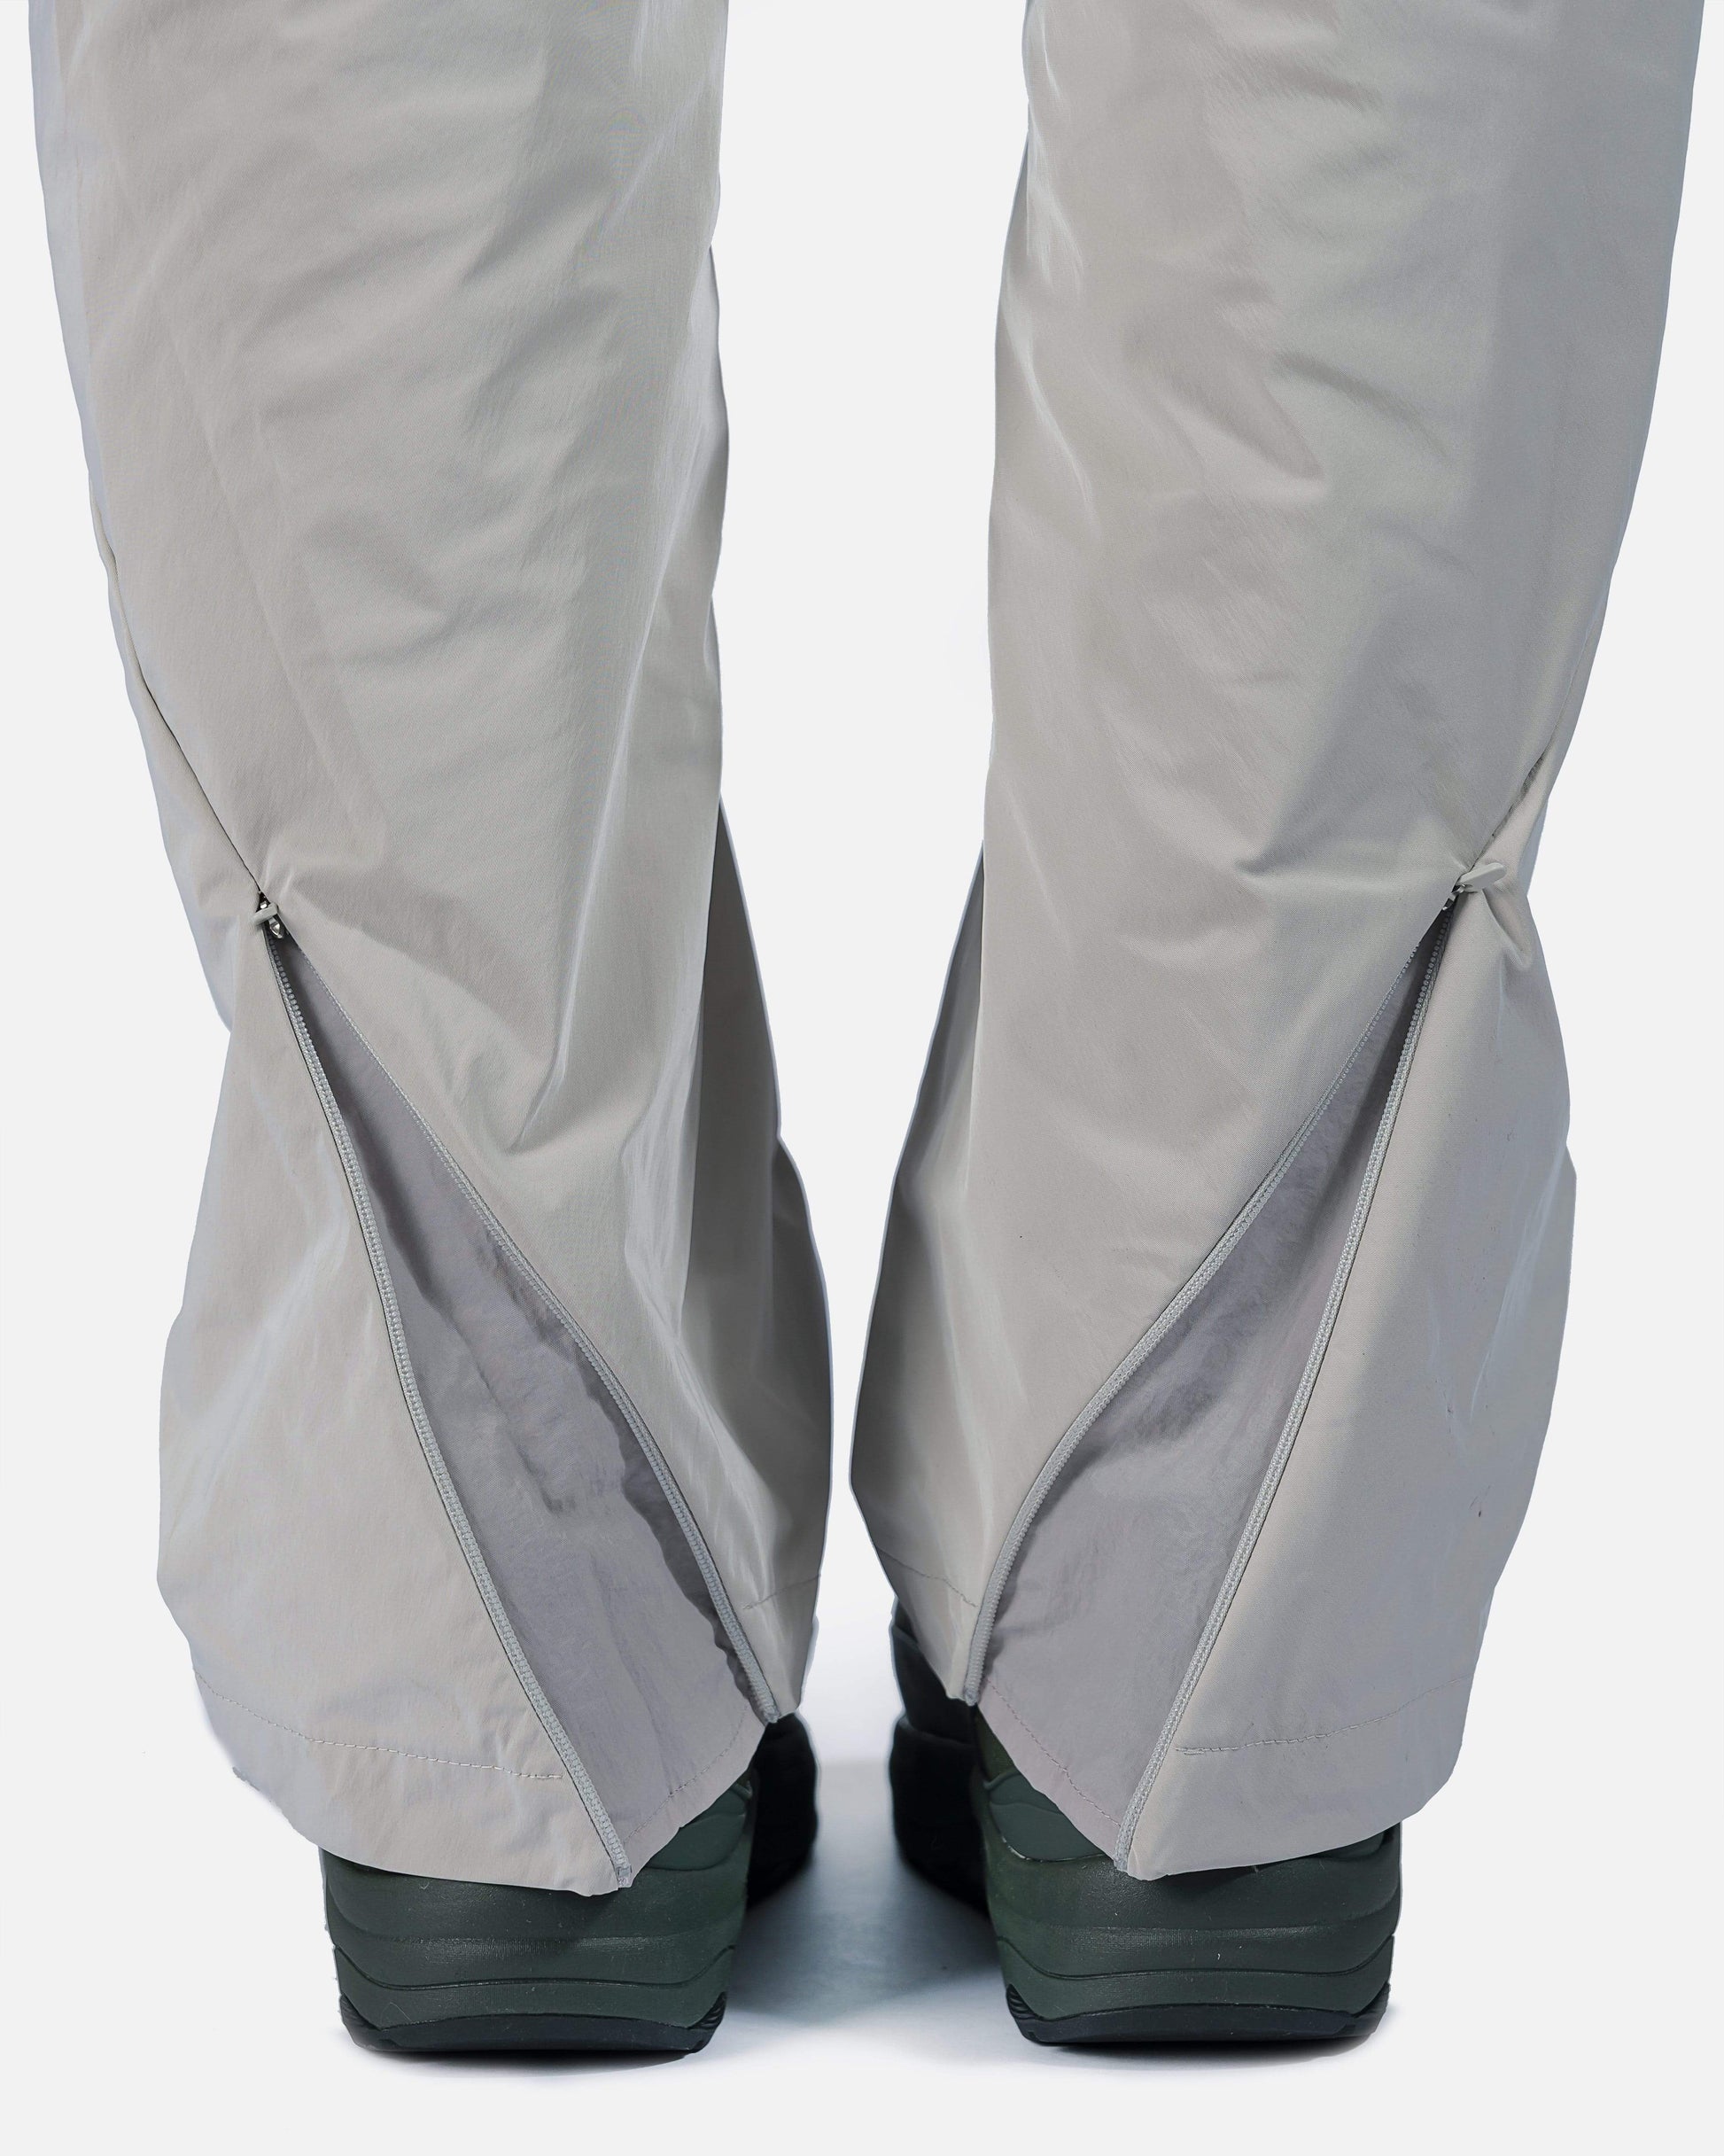 POST ARCHIVE FACTION (P.A.F) Men's Pants 4.0+ Technical Pants Right in Light Grey